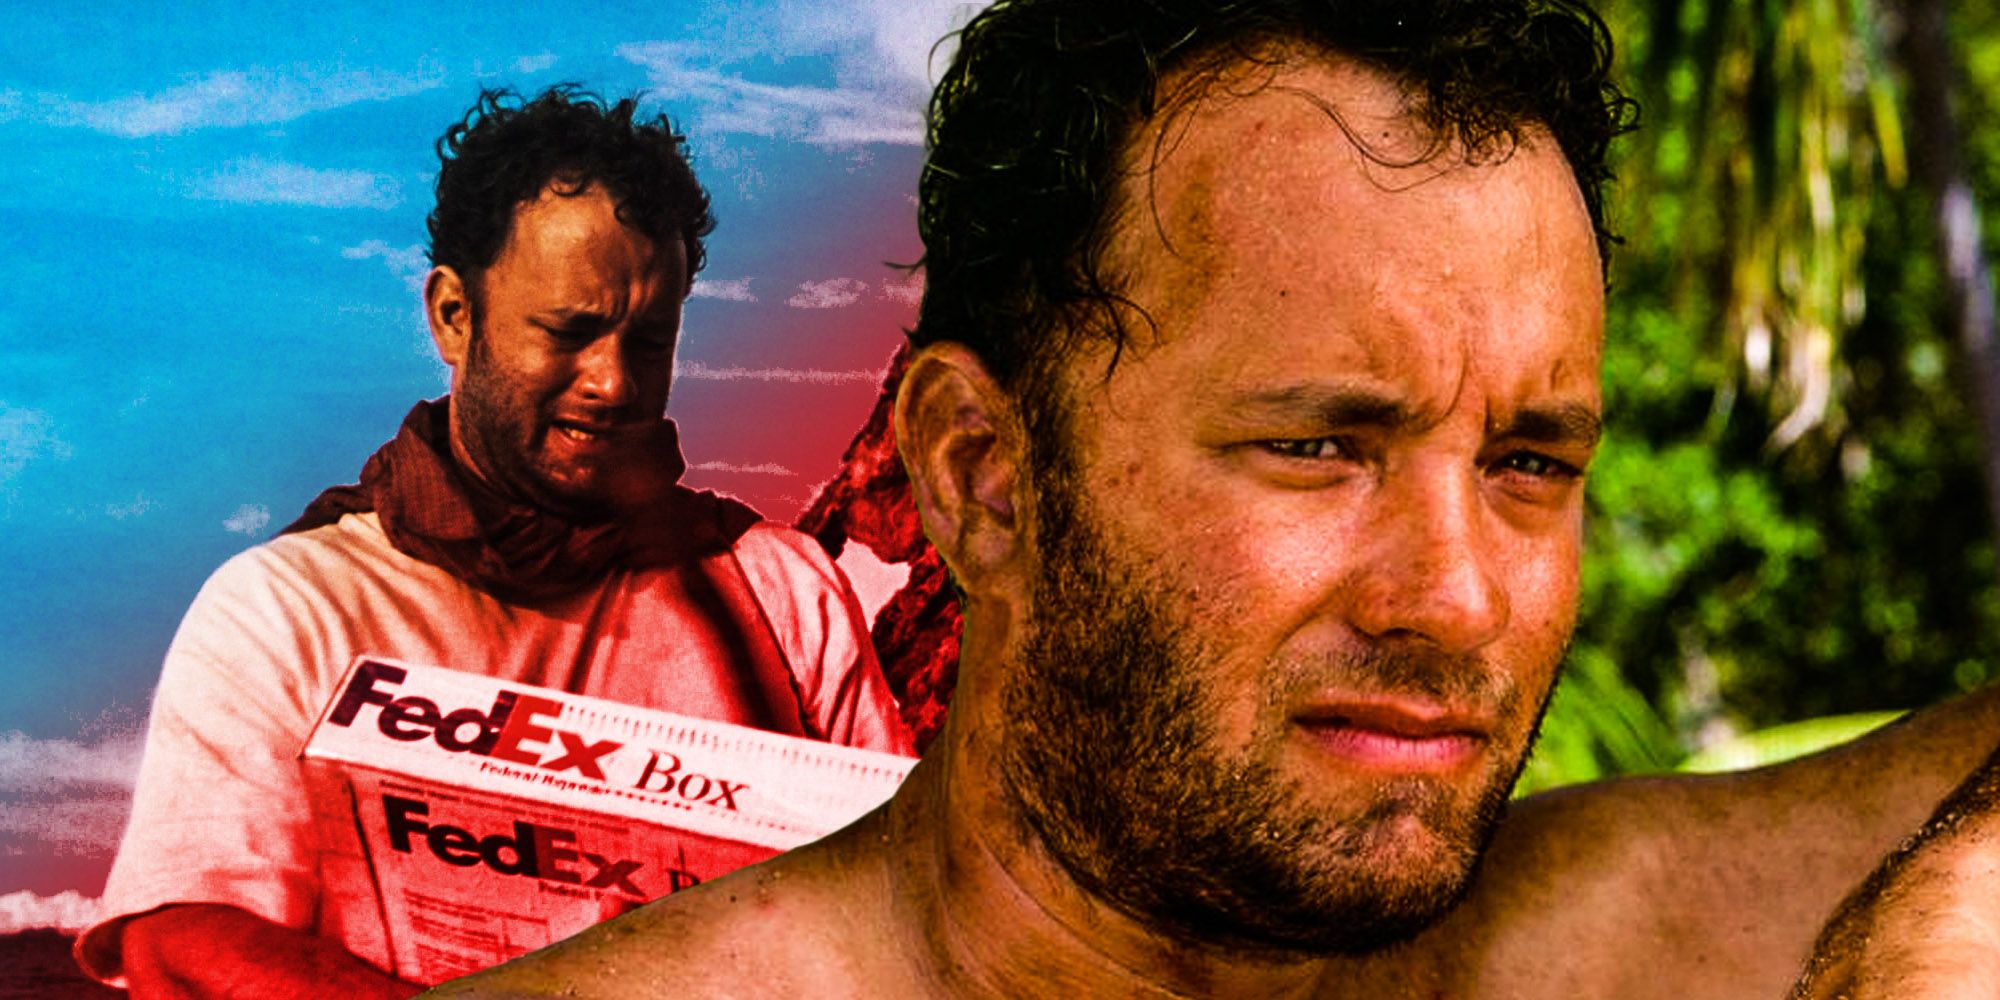 Cast Away: Did FedEx Pay For Product Placement?